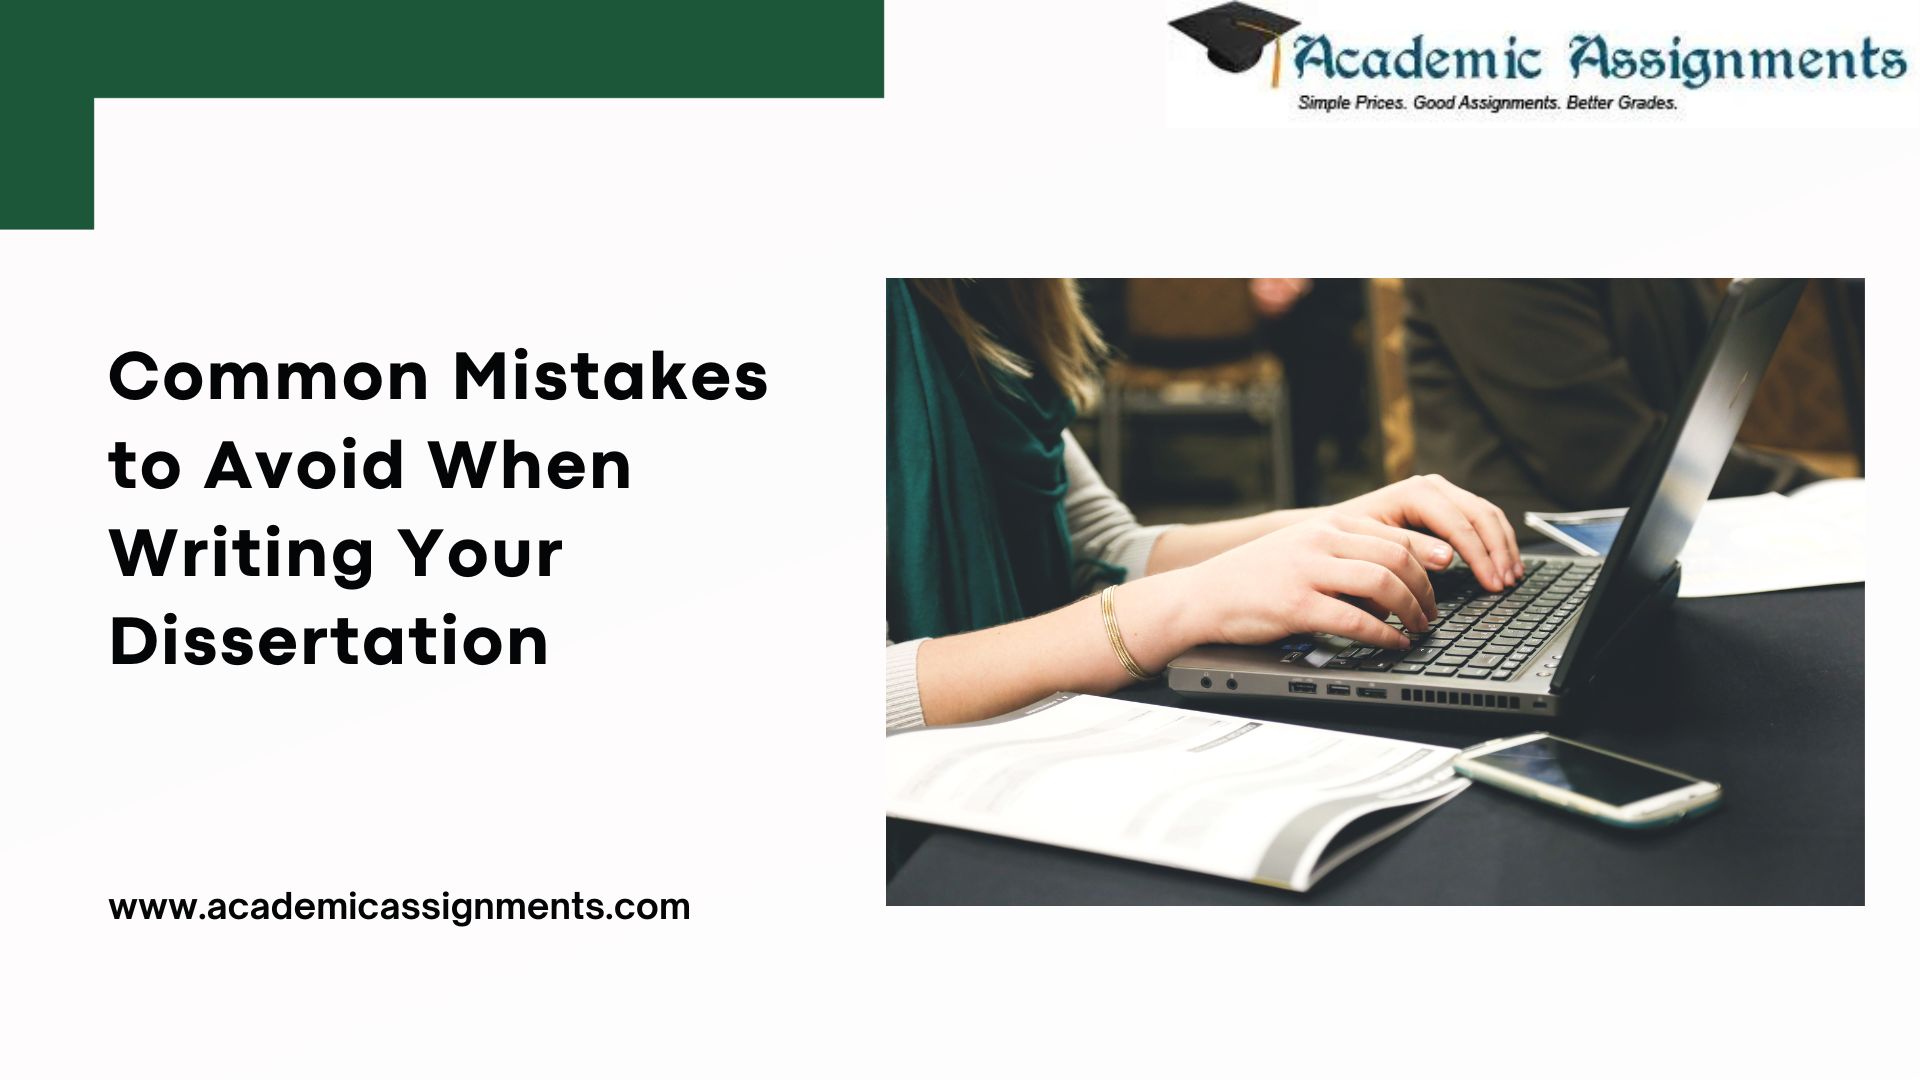 Common Mistakes to Avoid When Writing Your Dissertation